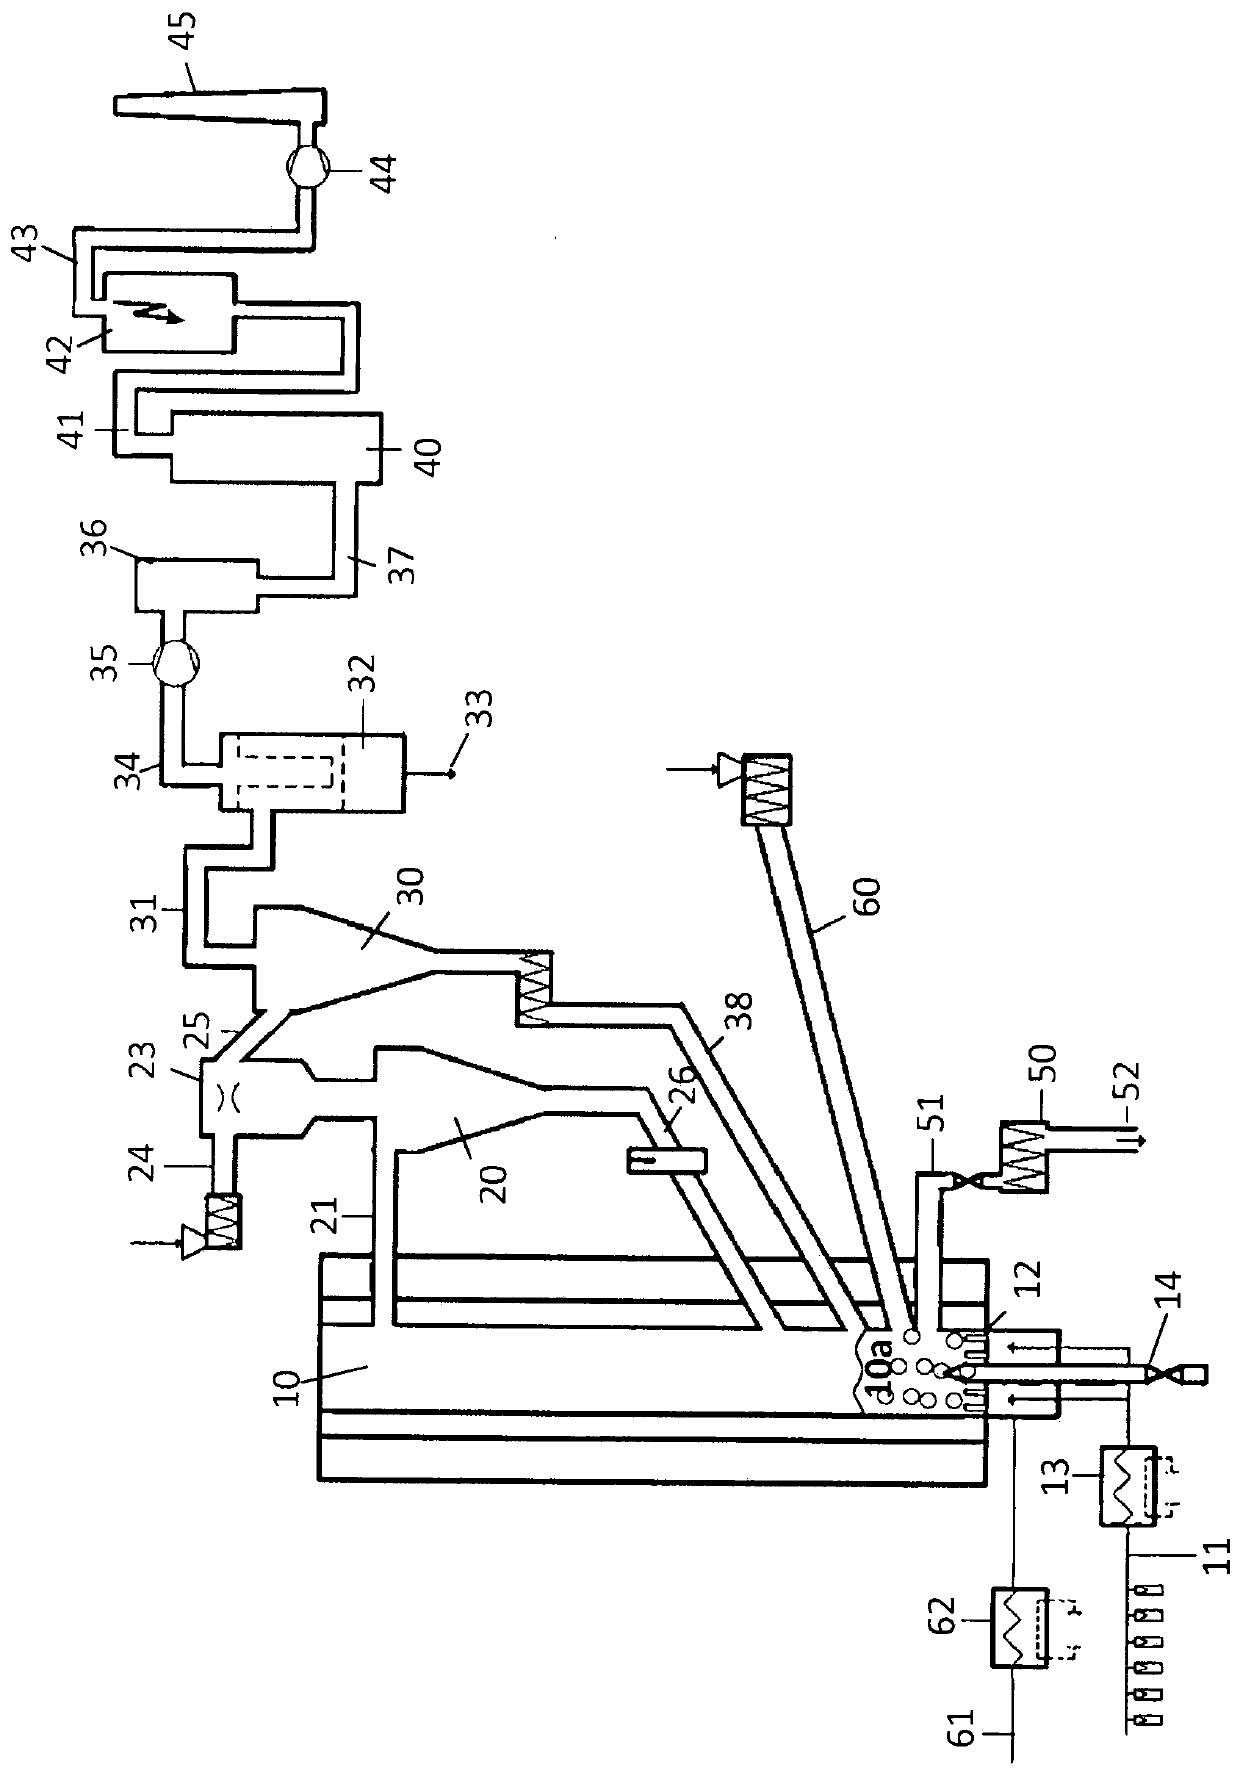 Process and plant for thermal treatment in a fluidized bed reactor